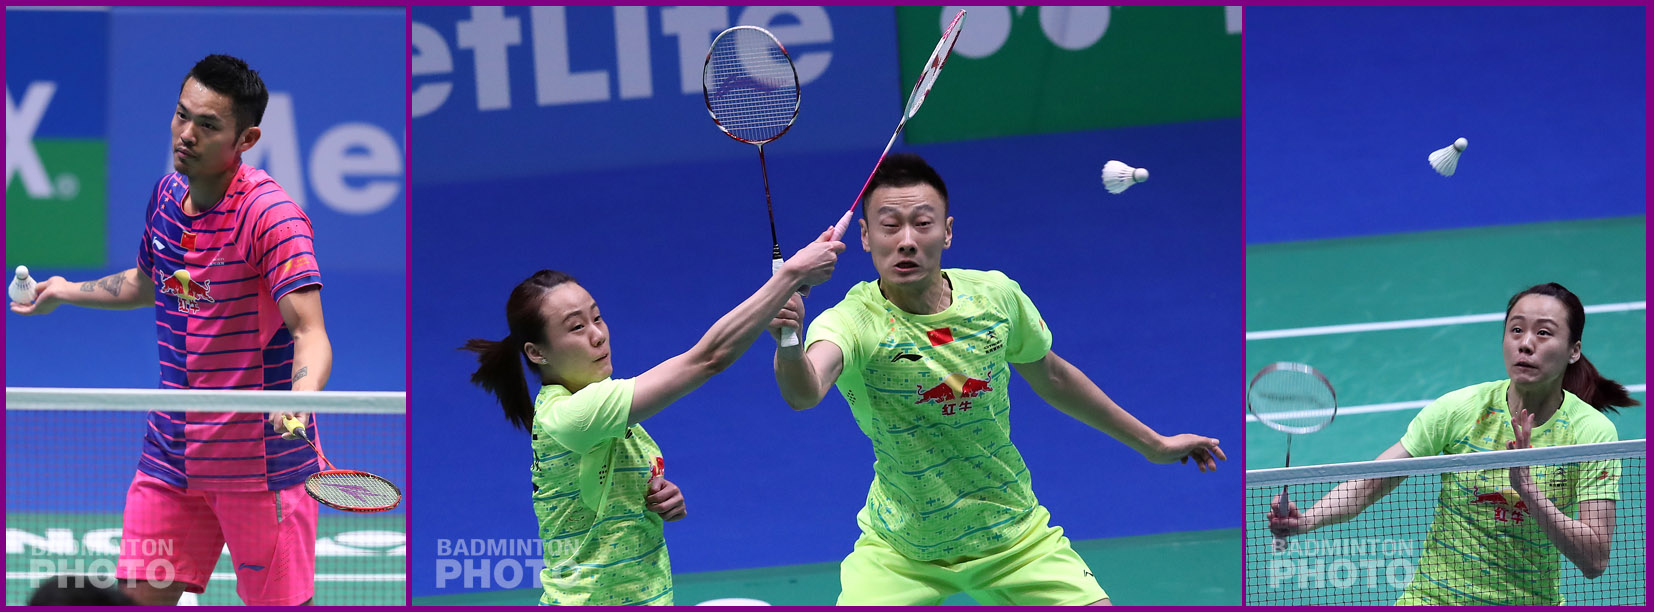 Two double gold medallists and one gold medallist doing double duty are converging on the Rio Olympic Games badminton competition.  Who has the best chance of reaching a total of […]